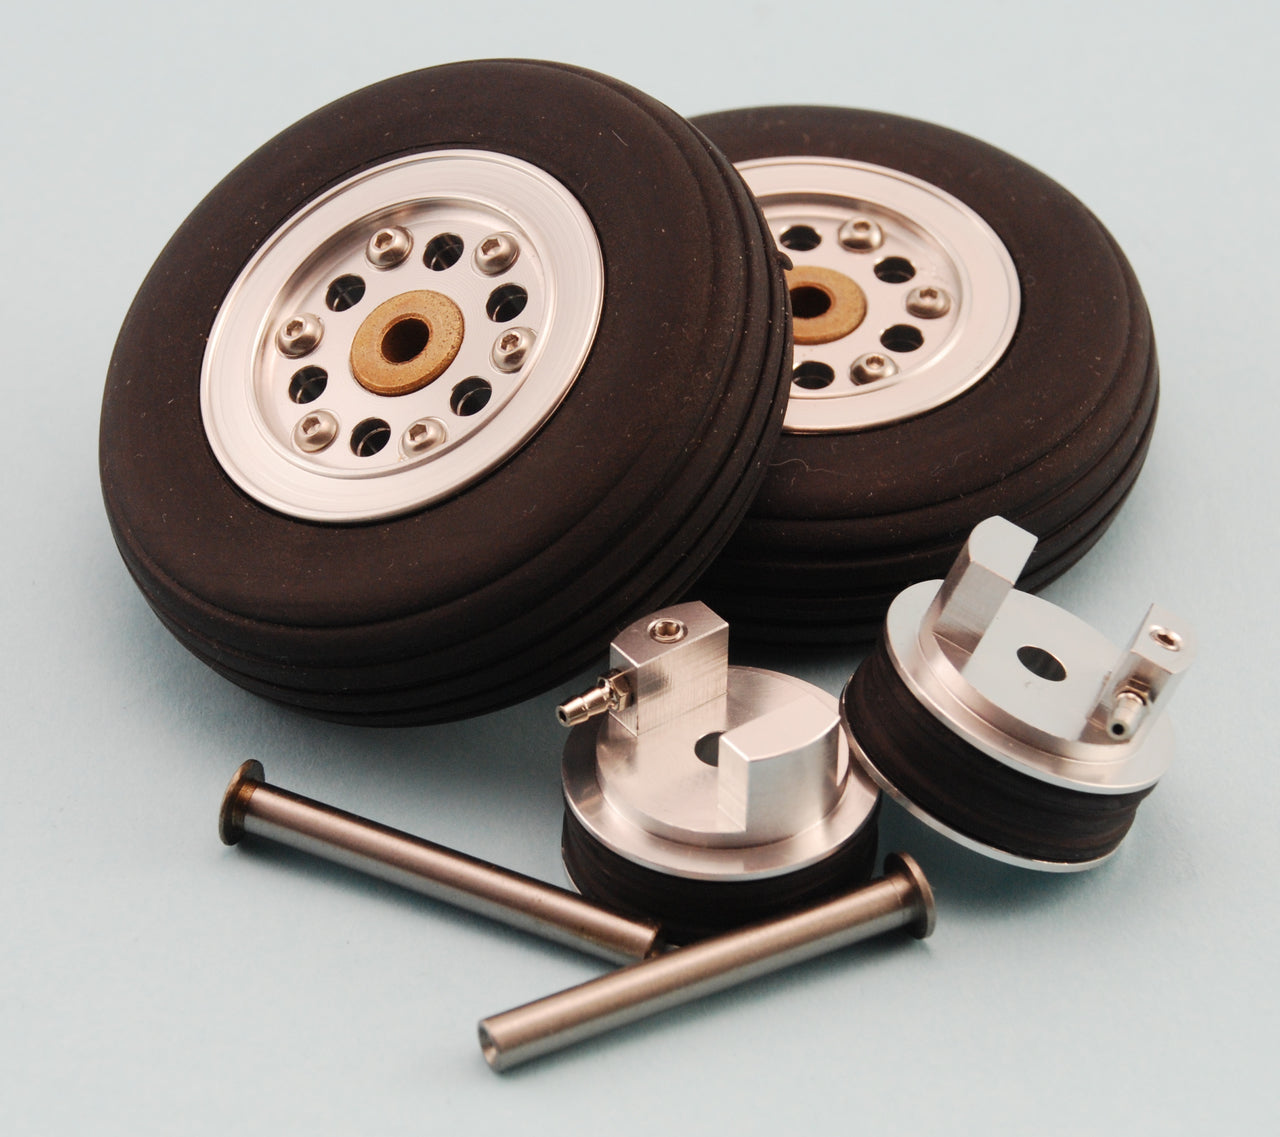 66mm (2.6 inch) Wheels, Mains Set with Brake Units & Axles from Intairco IAC-2004